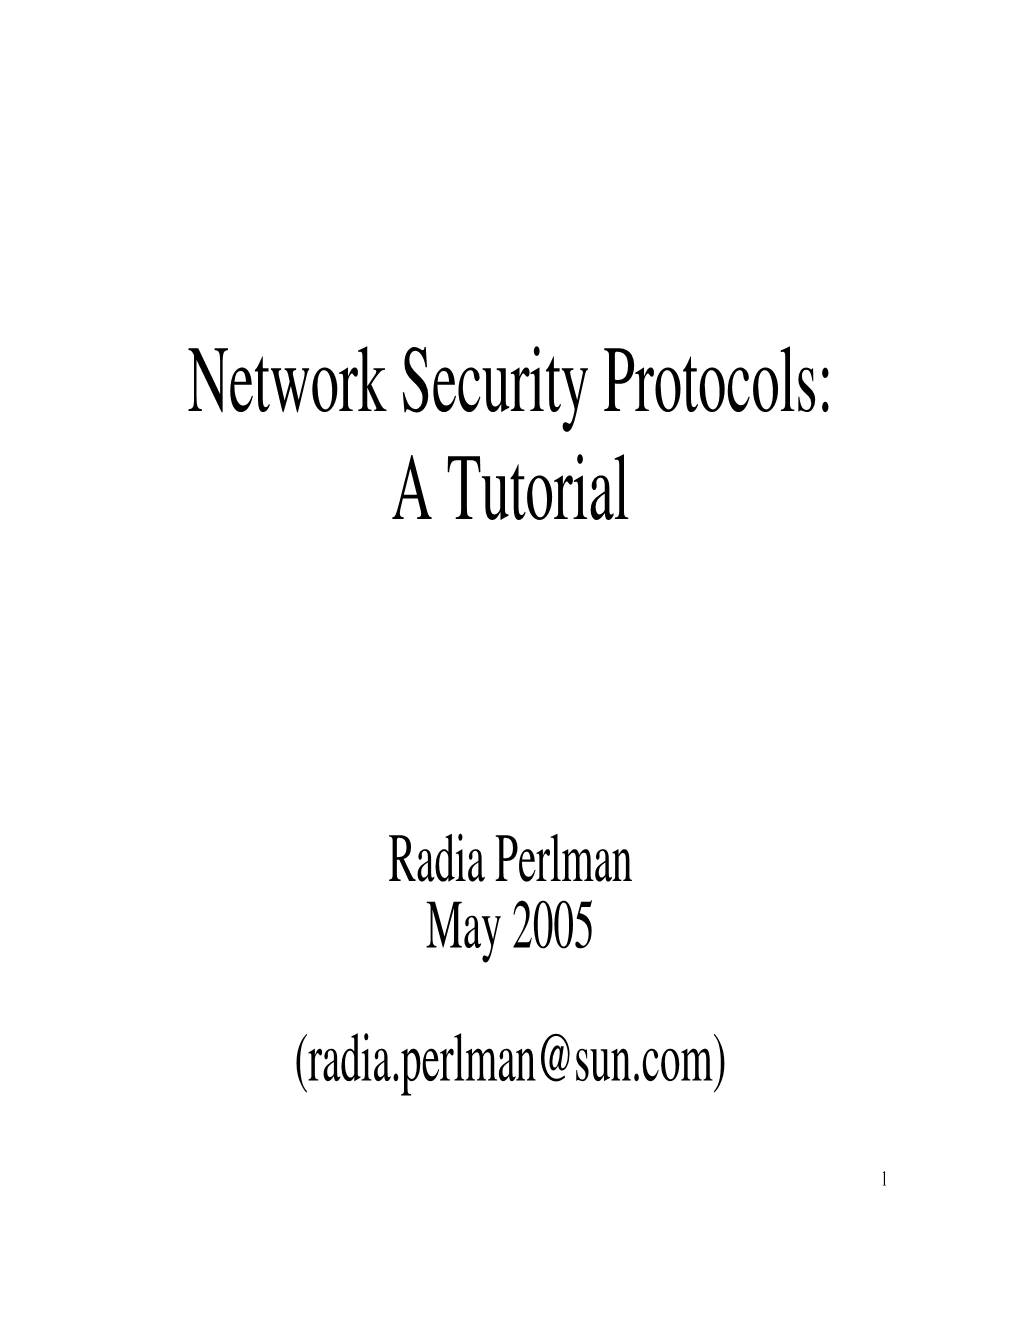 Network Security Protocols: a Tutorial